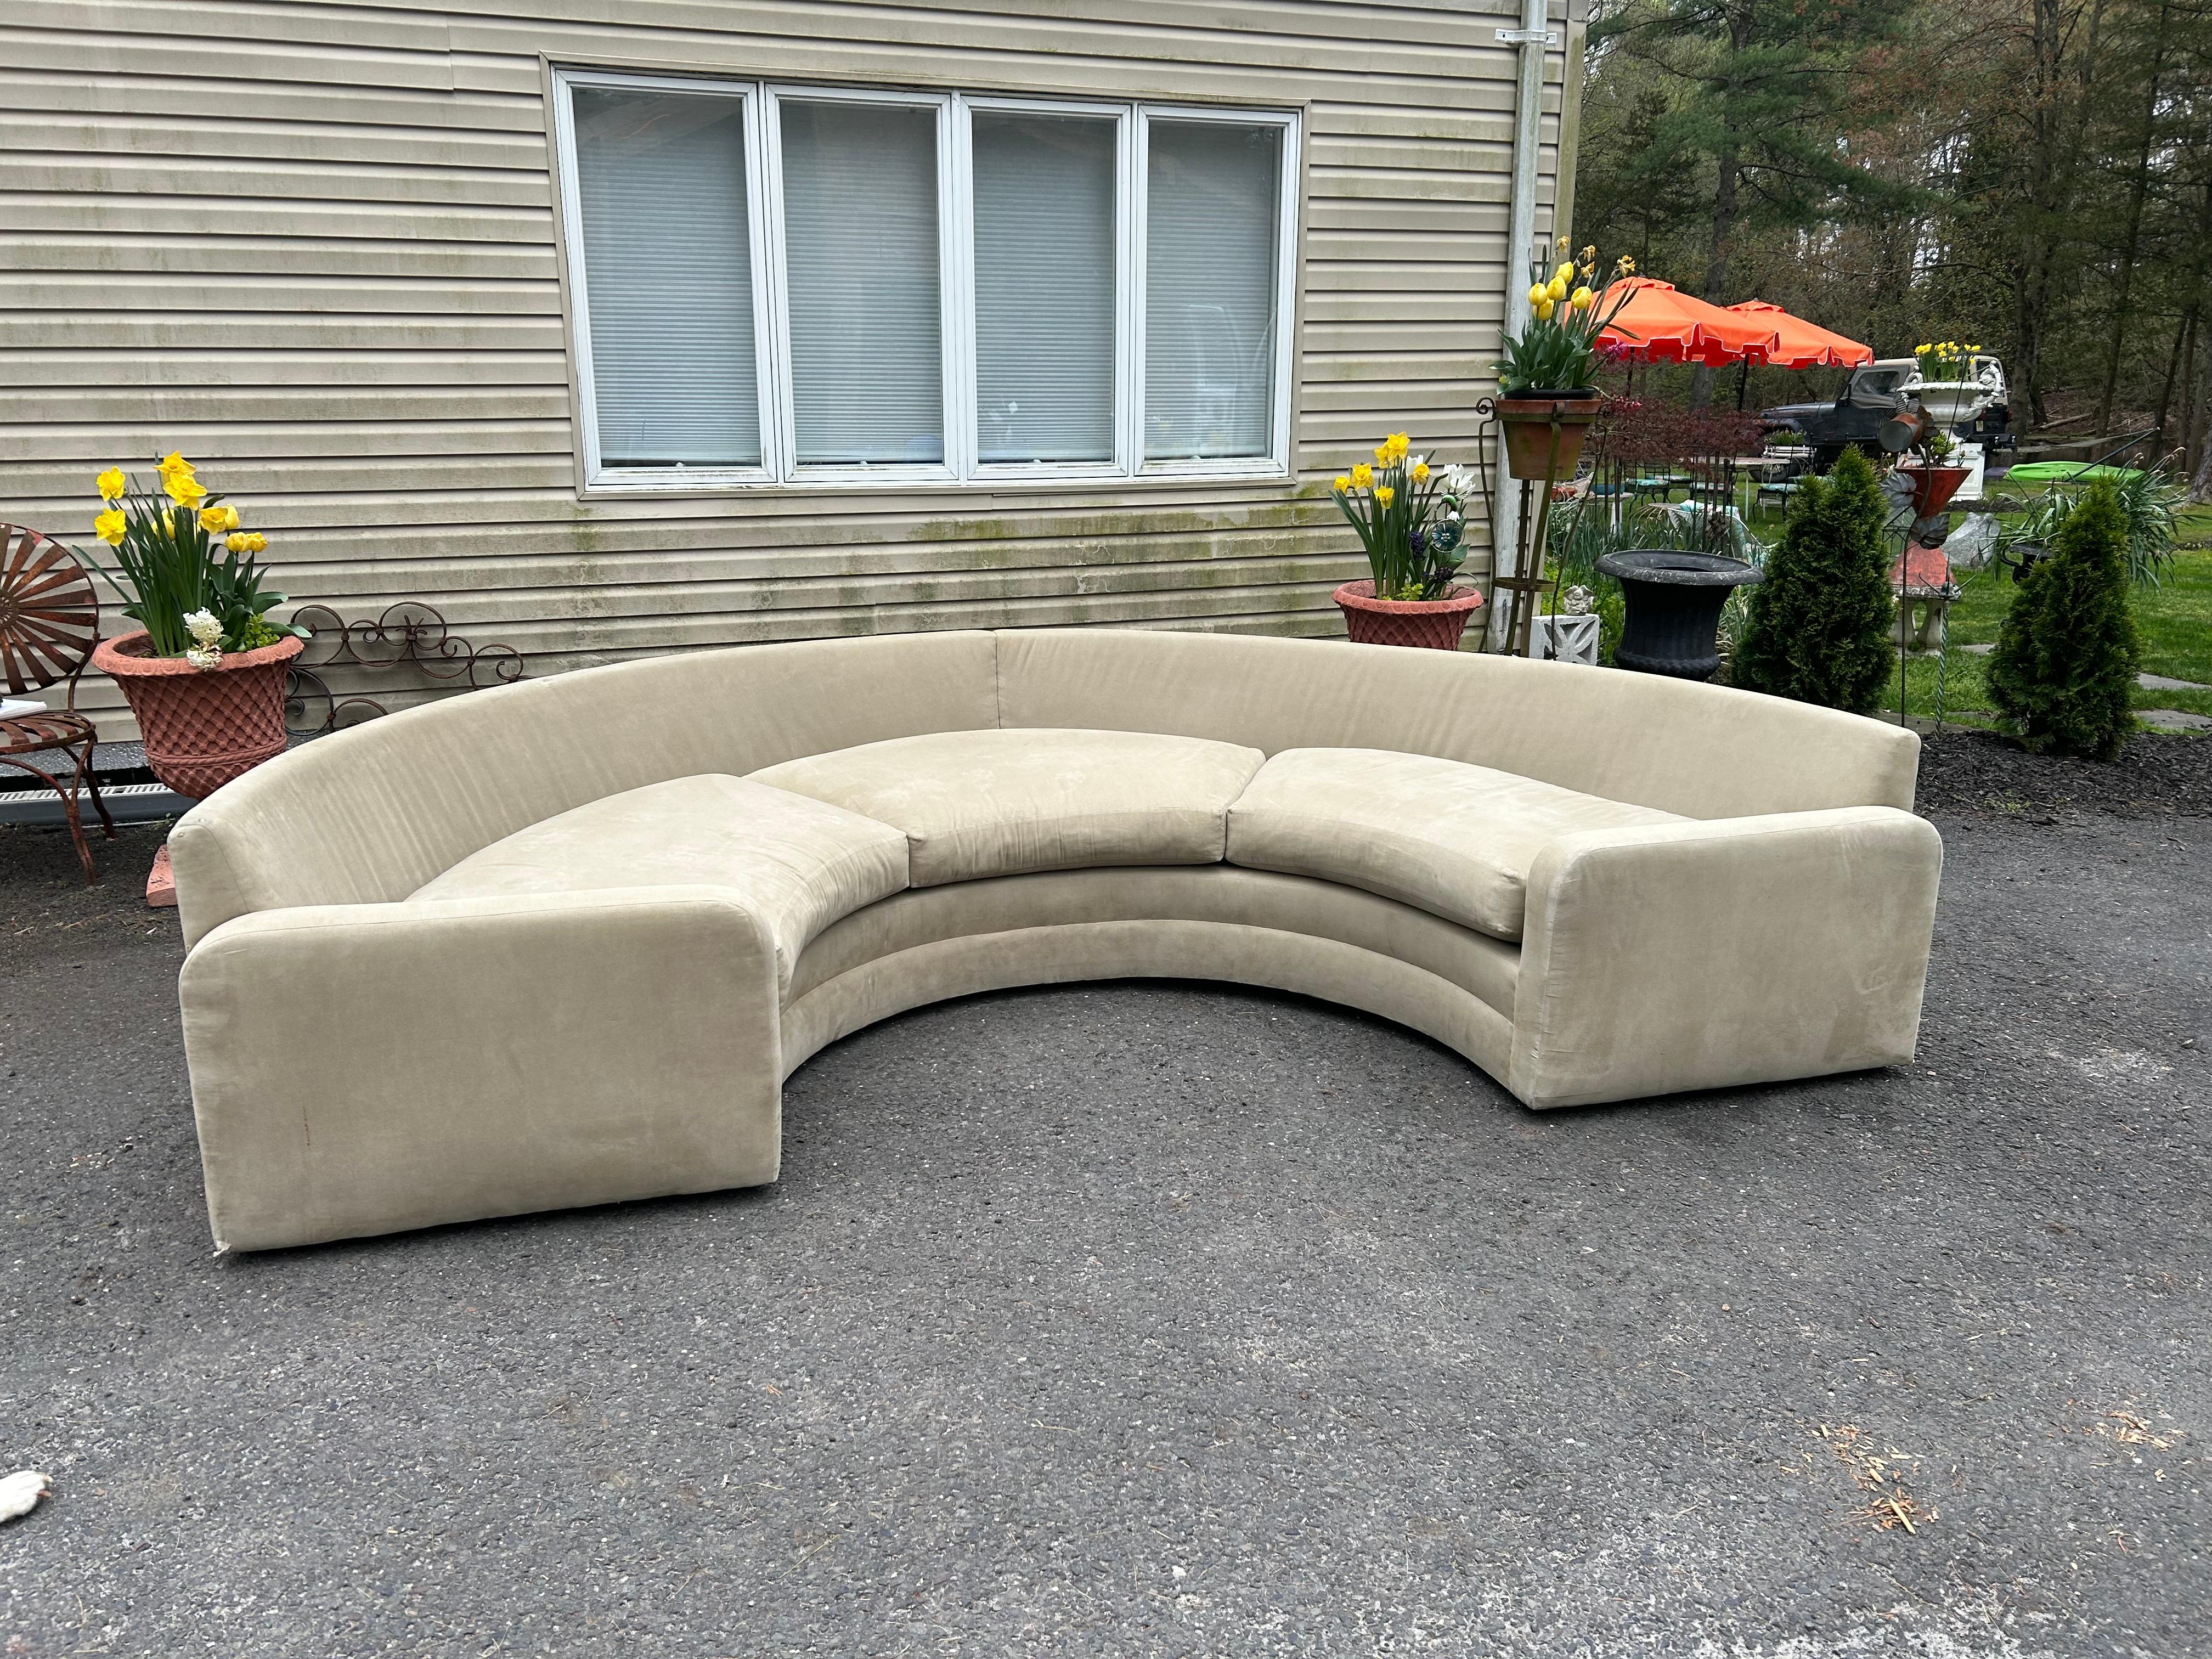 Wonderful Milo Baughman for Thayer Coggin semi-circular sofa.  This piece will certainly need to be reupholstered but Oh the possibilities!  This is a one piece sofa so it is a whopper but it is on casters so it moves around easily.  This particular